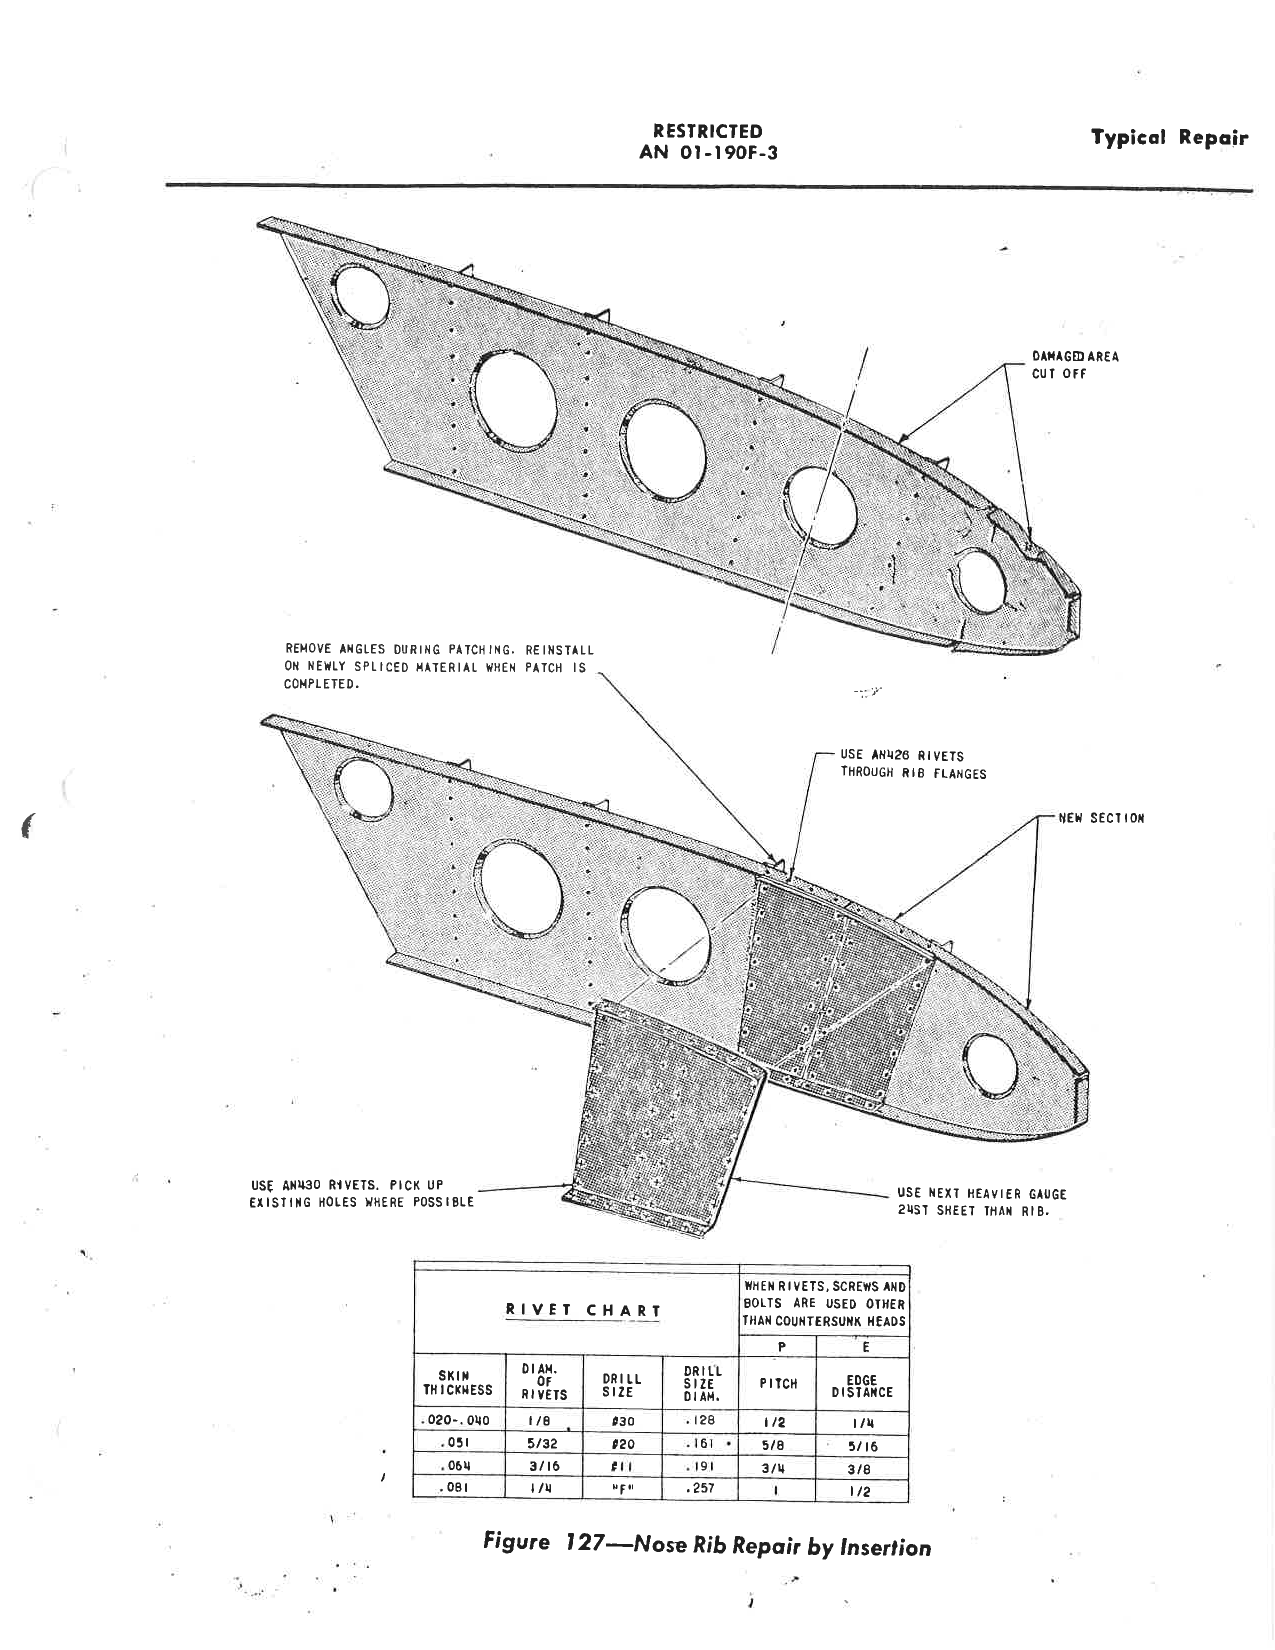 Sample page 168 from AirCorps Library document: Structural Repair - Handbook of Instructions - Wildcat FM-1 & FM-2